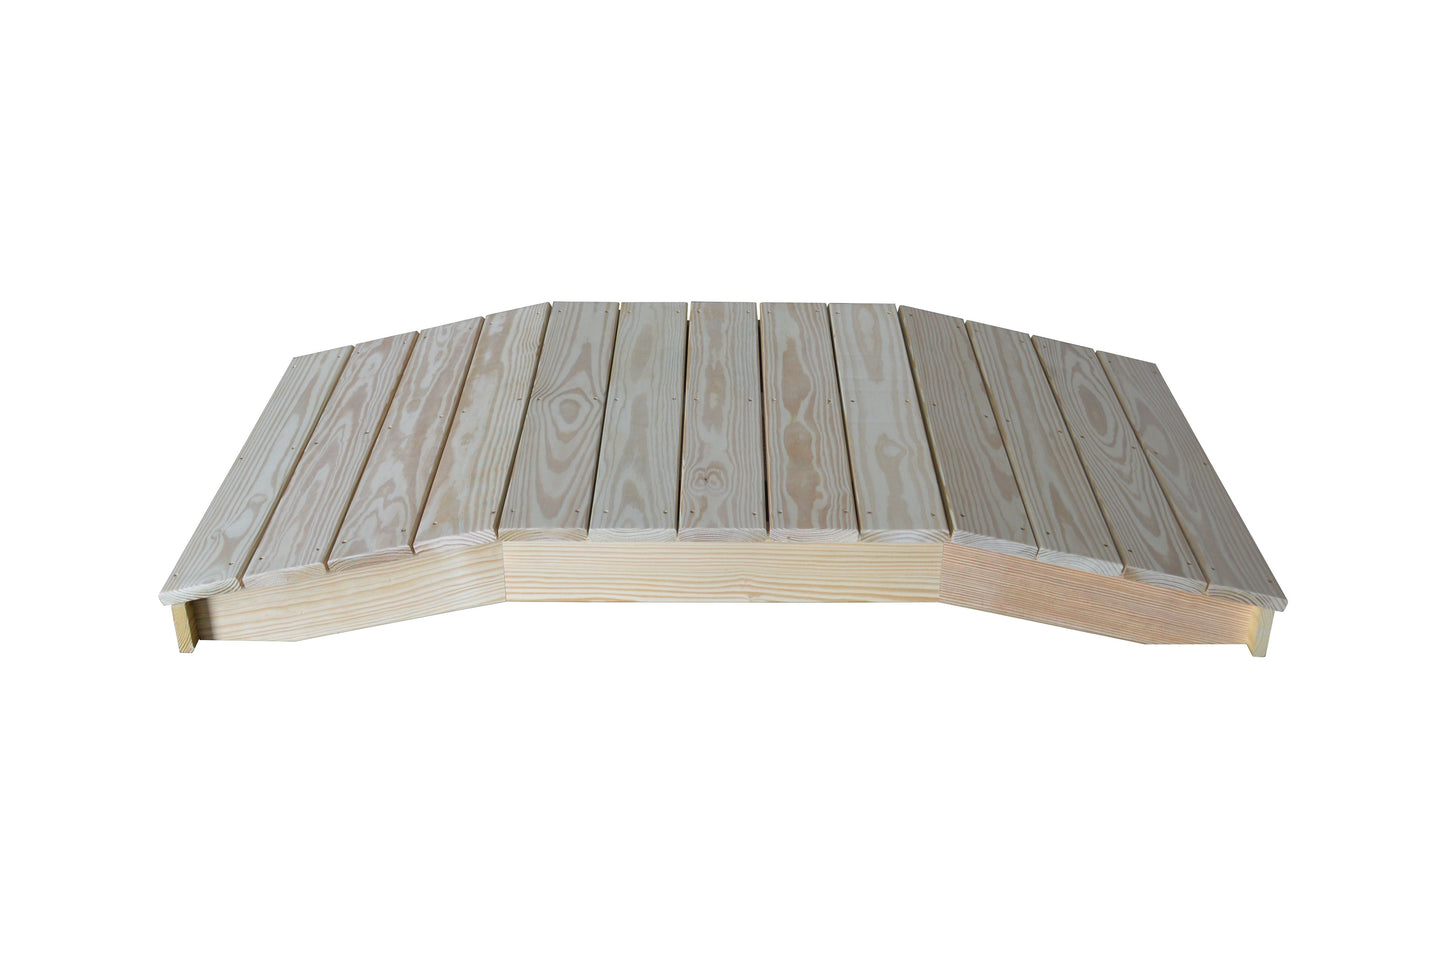 A&L Furniture Pressure Treated Pine 3'  x  8' Standard Plank Bridge - LEAD TIME TO SHIP 10 BUSINESS DAYS